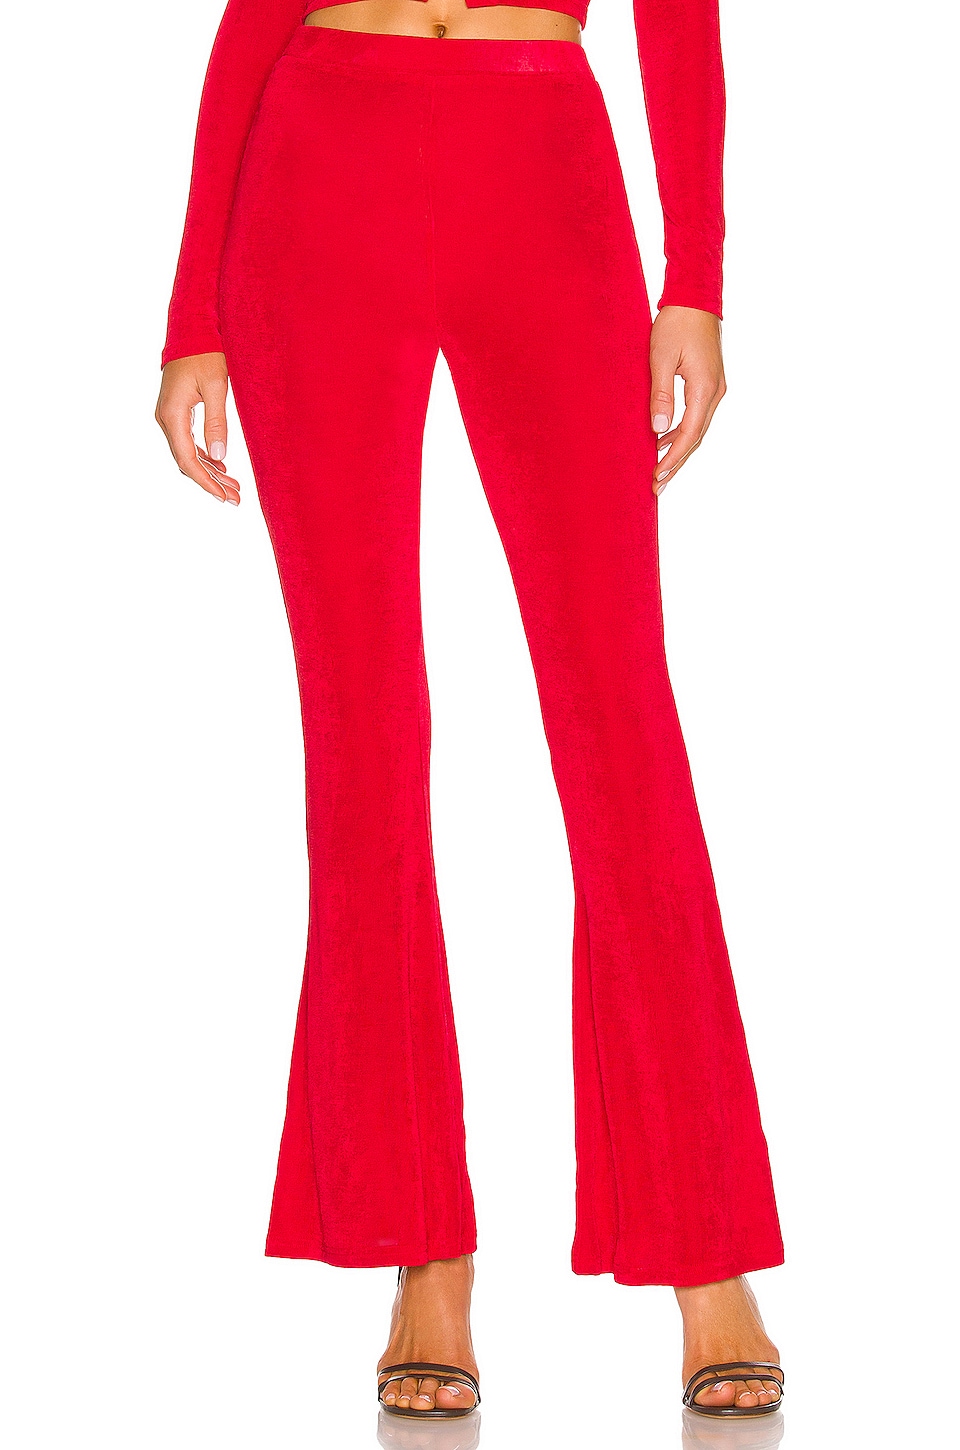 MORE TO COME Rachelle Flare Pant Red